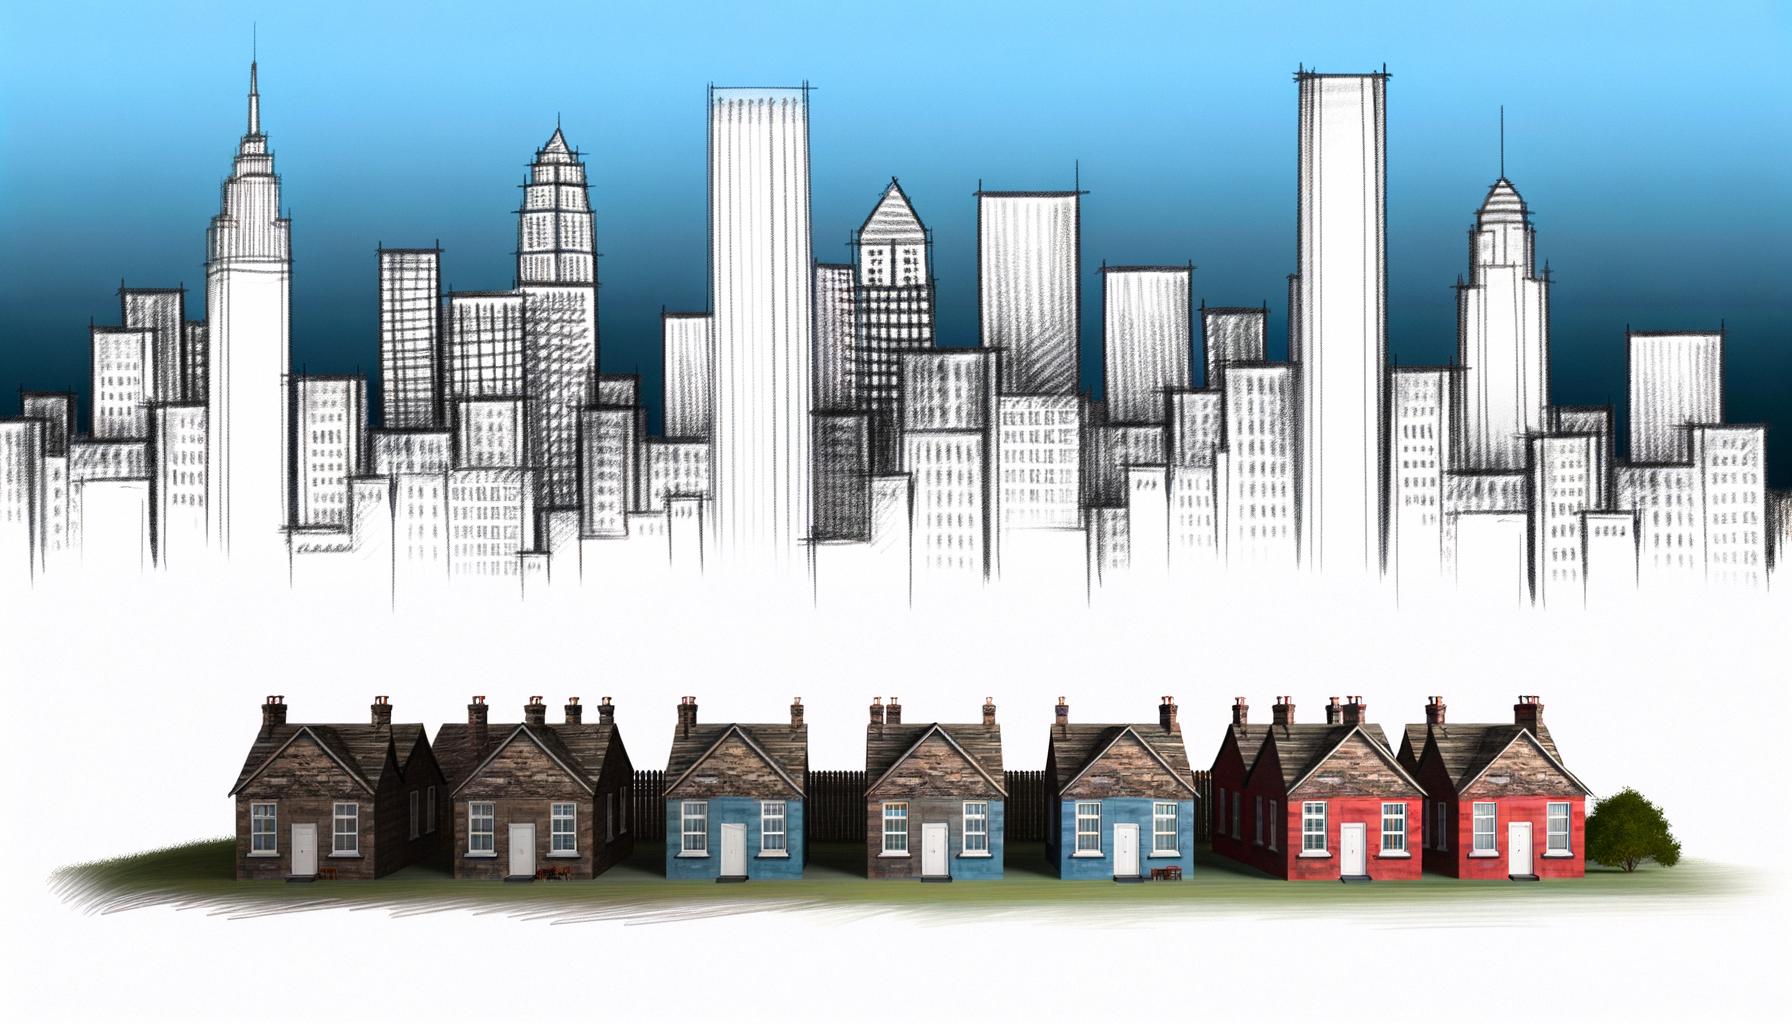 The challenge of housing affordability spans multiple states and solutions.